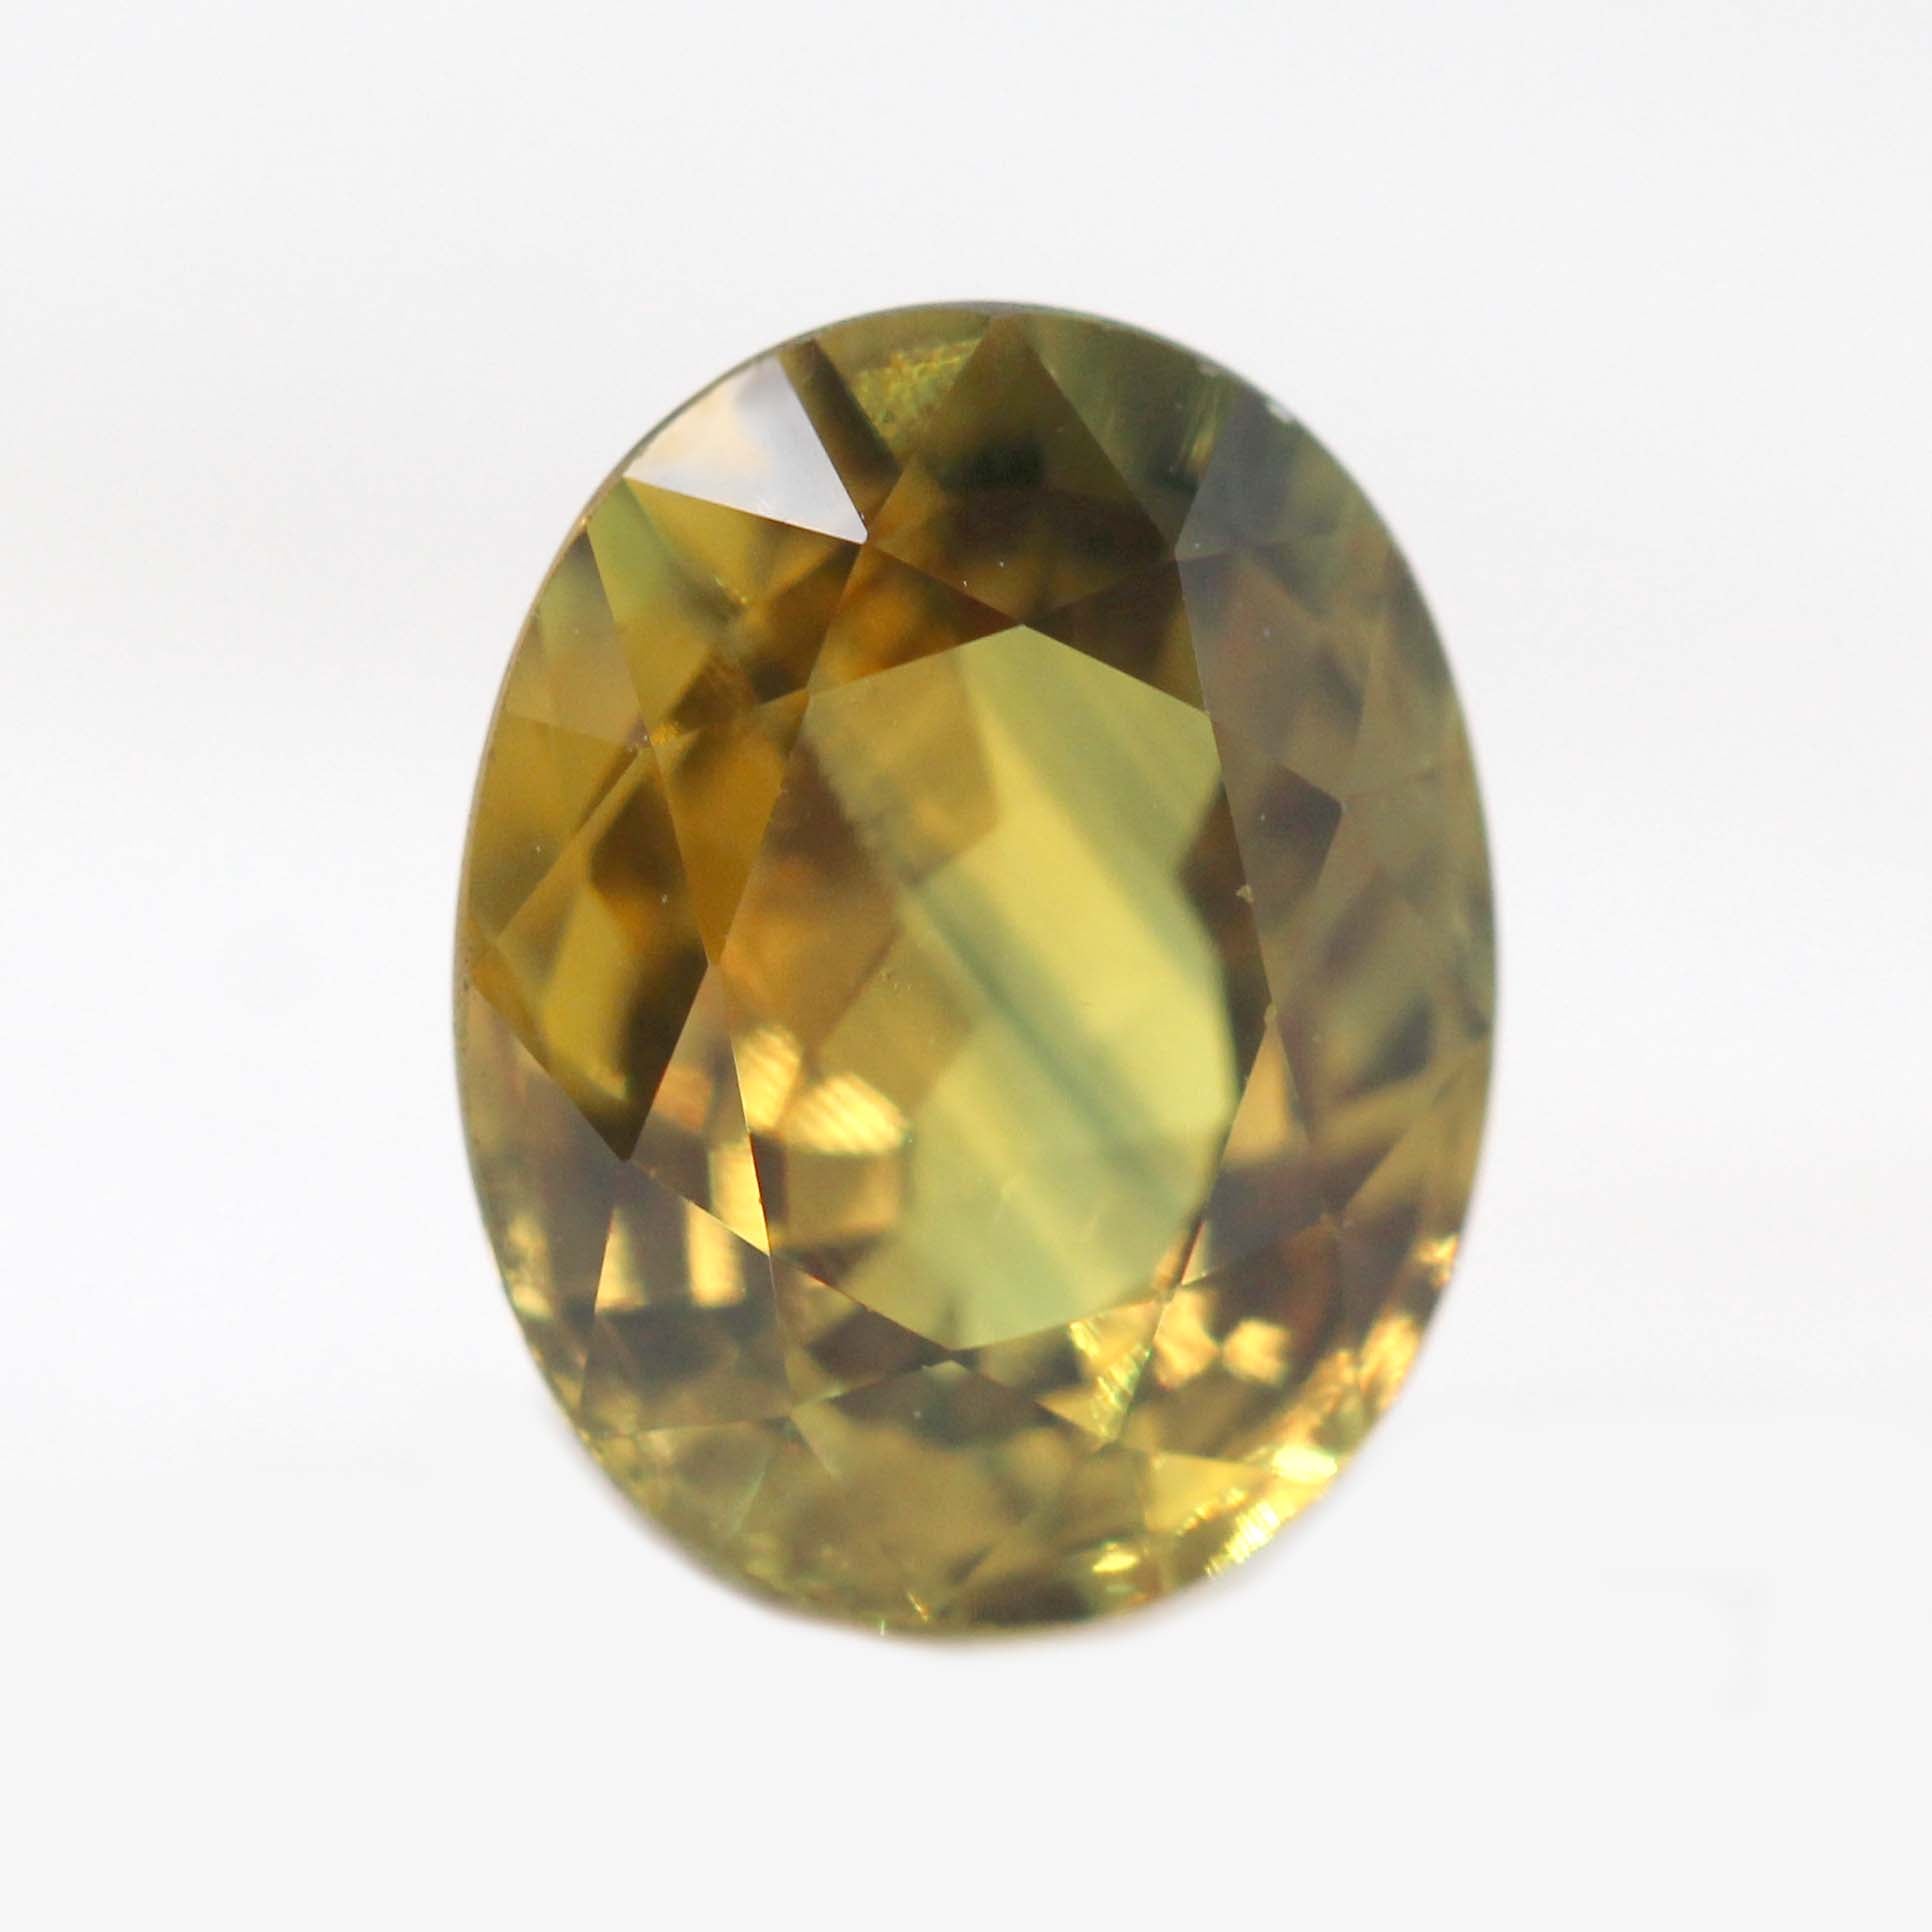 3.05 Carat Bi-Color Blue and Golden Yellow Oval Sapphire for Custom Work - Inventory Code YBOS305 - Midwinter Co. Alternative Bridal Rings and Modern Fine Jewelry